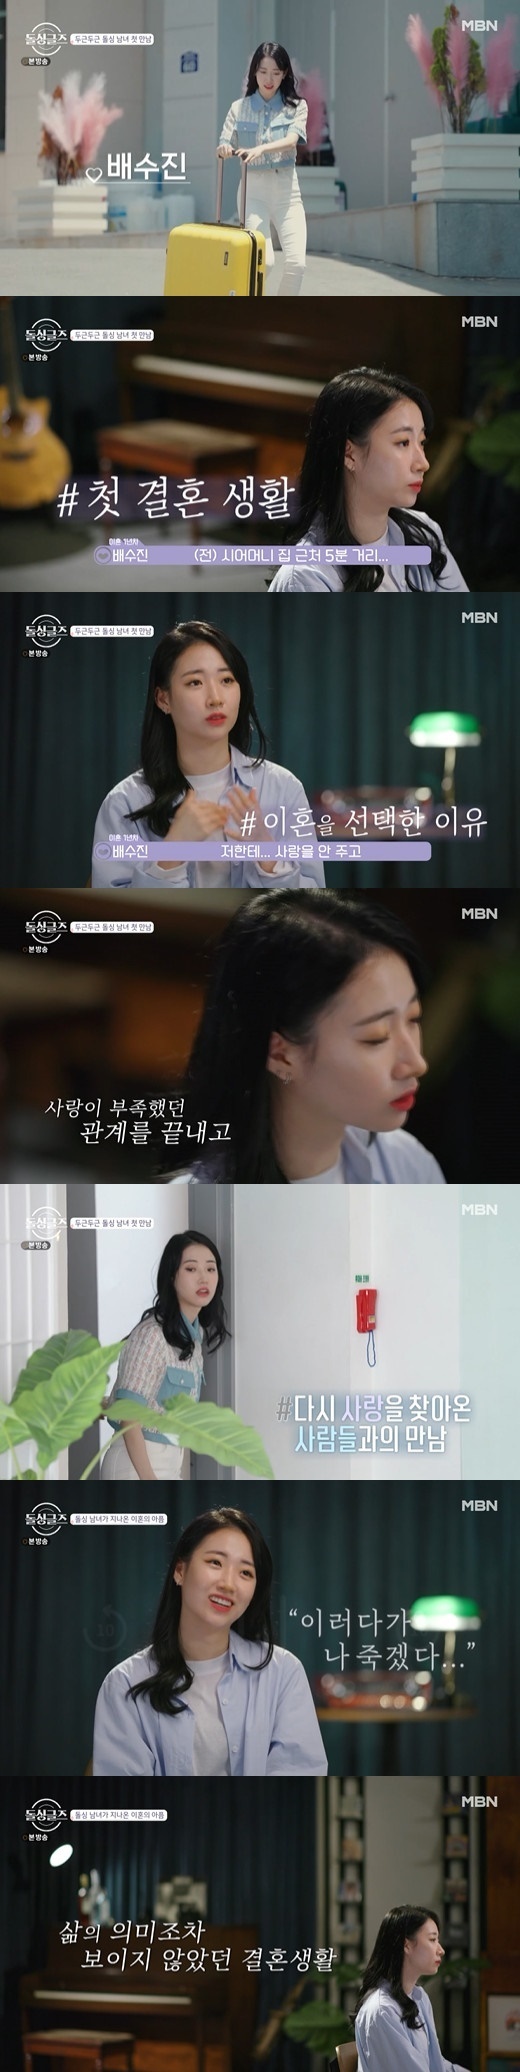 First Experience (Doll Singles)In Singles, talent Lee Hye-Yeong and Actor Jung Gyu-woon confessed their own divorce wounds.MBN Singles, a comprehensive channel broadcast on the afternoon of the 11th, depicts Lee Hye-Yeong and Jung Gyu-woon in the 10th and 5th years of remarriage, respectively, Confessions of past divorce wounds.On this day, Jung Gyu-woon replied, I do not think it would have been easy to decide on the appearance. I honestly can not speak so coolly. I am sorry for my wife.Jung Gyu-woon married in 2014 but in 2016 after two years, he was divided; he then remarried to Kim wo-rim, 10 years younger in 2017.Lee Hye-Yeong cheered, If you are next to me, it is nothing. He said, If you remarry, you will have to be more active than just loving singles.How was he? When I met my wife now, was he more active than when I was single or careful? Jung Gyu-woon then showed off his limited love for his wife, saying, I felt like I was dating for the first time, it was like my first experience.Lee Hye-Yeong married Lee Sang-min, a Lula singer, in 2004, but the following year he was divorced.In 2011, he remarried a one-year-old non-entertainment businessman in Hawaii, USA.My sister speaks out loud, but I can not do it yet.I have not met people for almost three years, Jung Gyu-woon said, I have lost my words and it is hard to say even now.Lee Hye-Yeong said: Three years after Divorce, I havent lived my sanity.I had a very difficult time because I had a mixture of various emotions such as peoples eyes, my mind, and my sorry heart to my mother. Lee Hye-Yeong also sympathized with Jung Gyu-woons story of Ive lost contact with people I know like (the ex-wife); he said, I think it took me a decade too.Meeting people in the intersection together. Im fine, but everyones uncomfortable with me, so Im not going to see it.I got married and became comfortable and happy again, so I was able to meet them again. At that time, I was uncomfortable with caution. On the other hand, the comedian Bae Dong-sungs daughter Bae Soo-jin entered Dolsing Village as a member of Singles.I have been living in a year since I was married, he said. I lived five minutes walk near my mother-in-laws house when I first married.I was newly married in the studio, but I was hit and fought more because I did not have a private space. Not only that, but (my ex-husband) did not love me.I was huge and ignoring it, he said.Especially, Bae Soo-jin said, When I open my eyes, I see my husband and how do I start the day? I cried at night and kept repeating this, so I was going to die.It was like a person who really forced himself to live, he said.